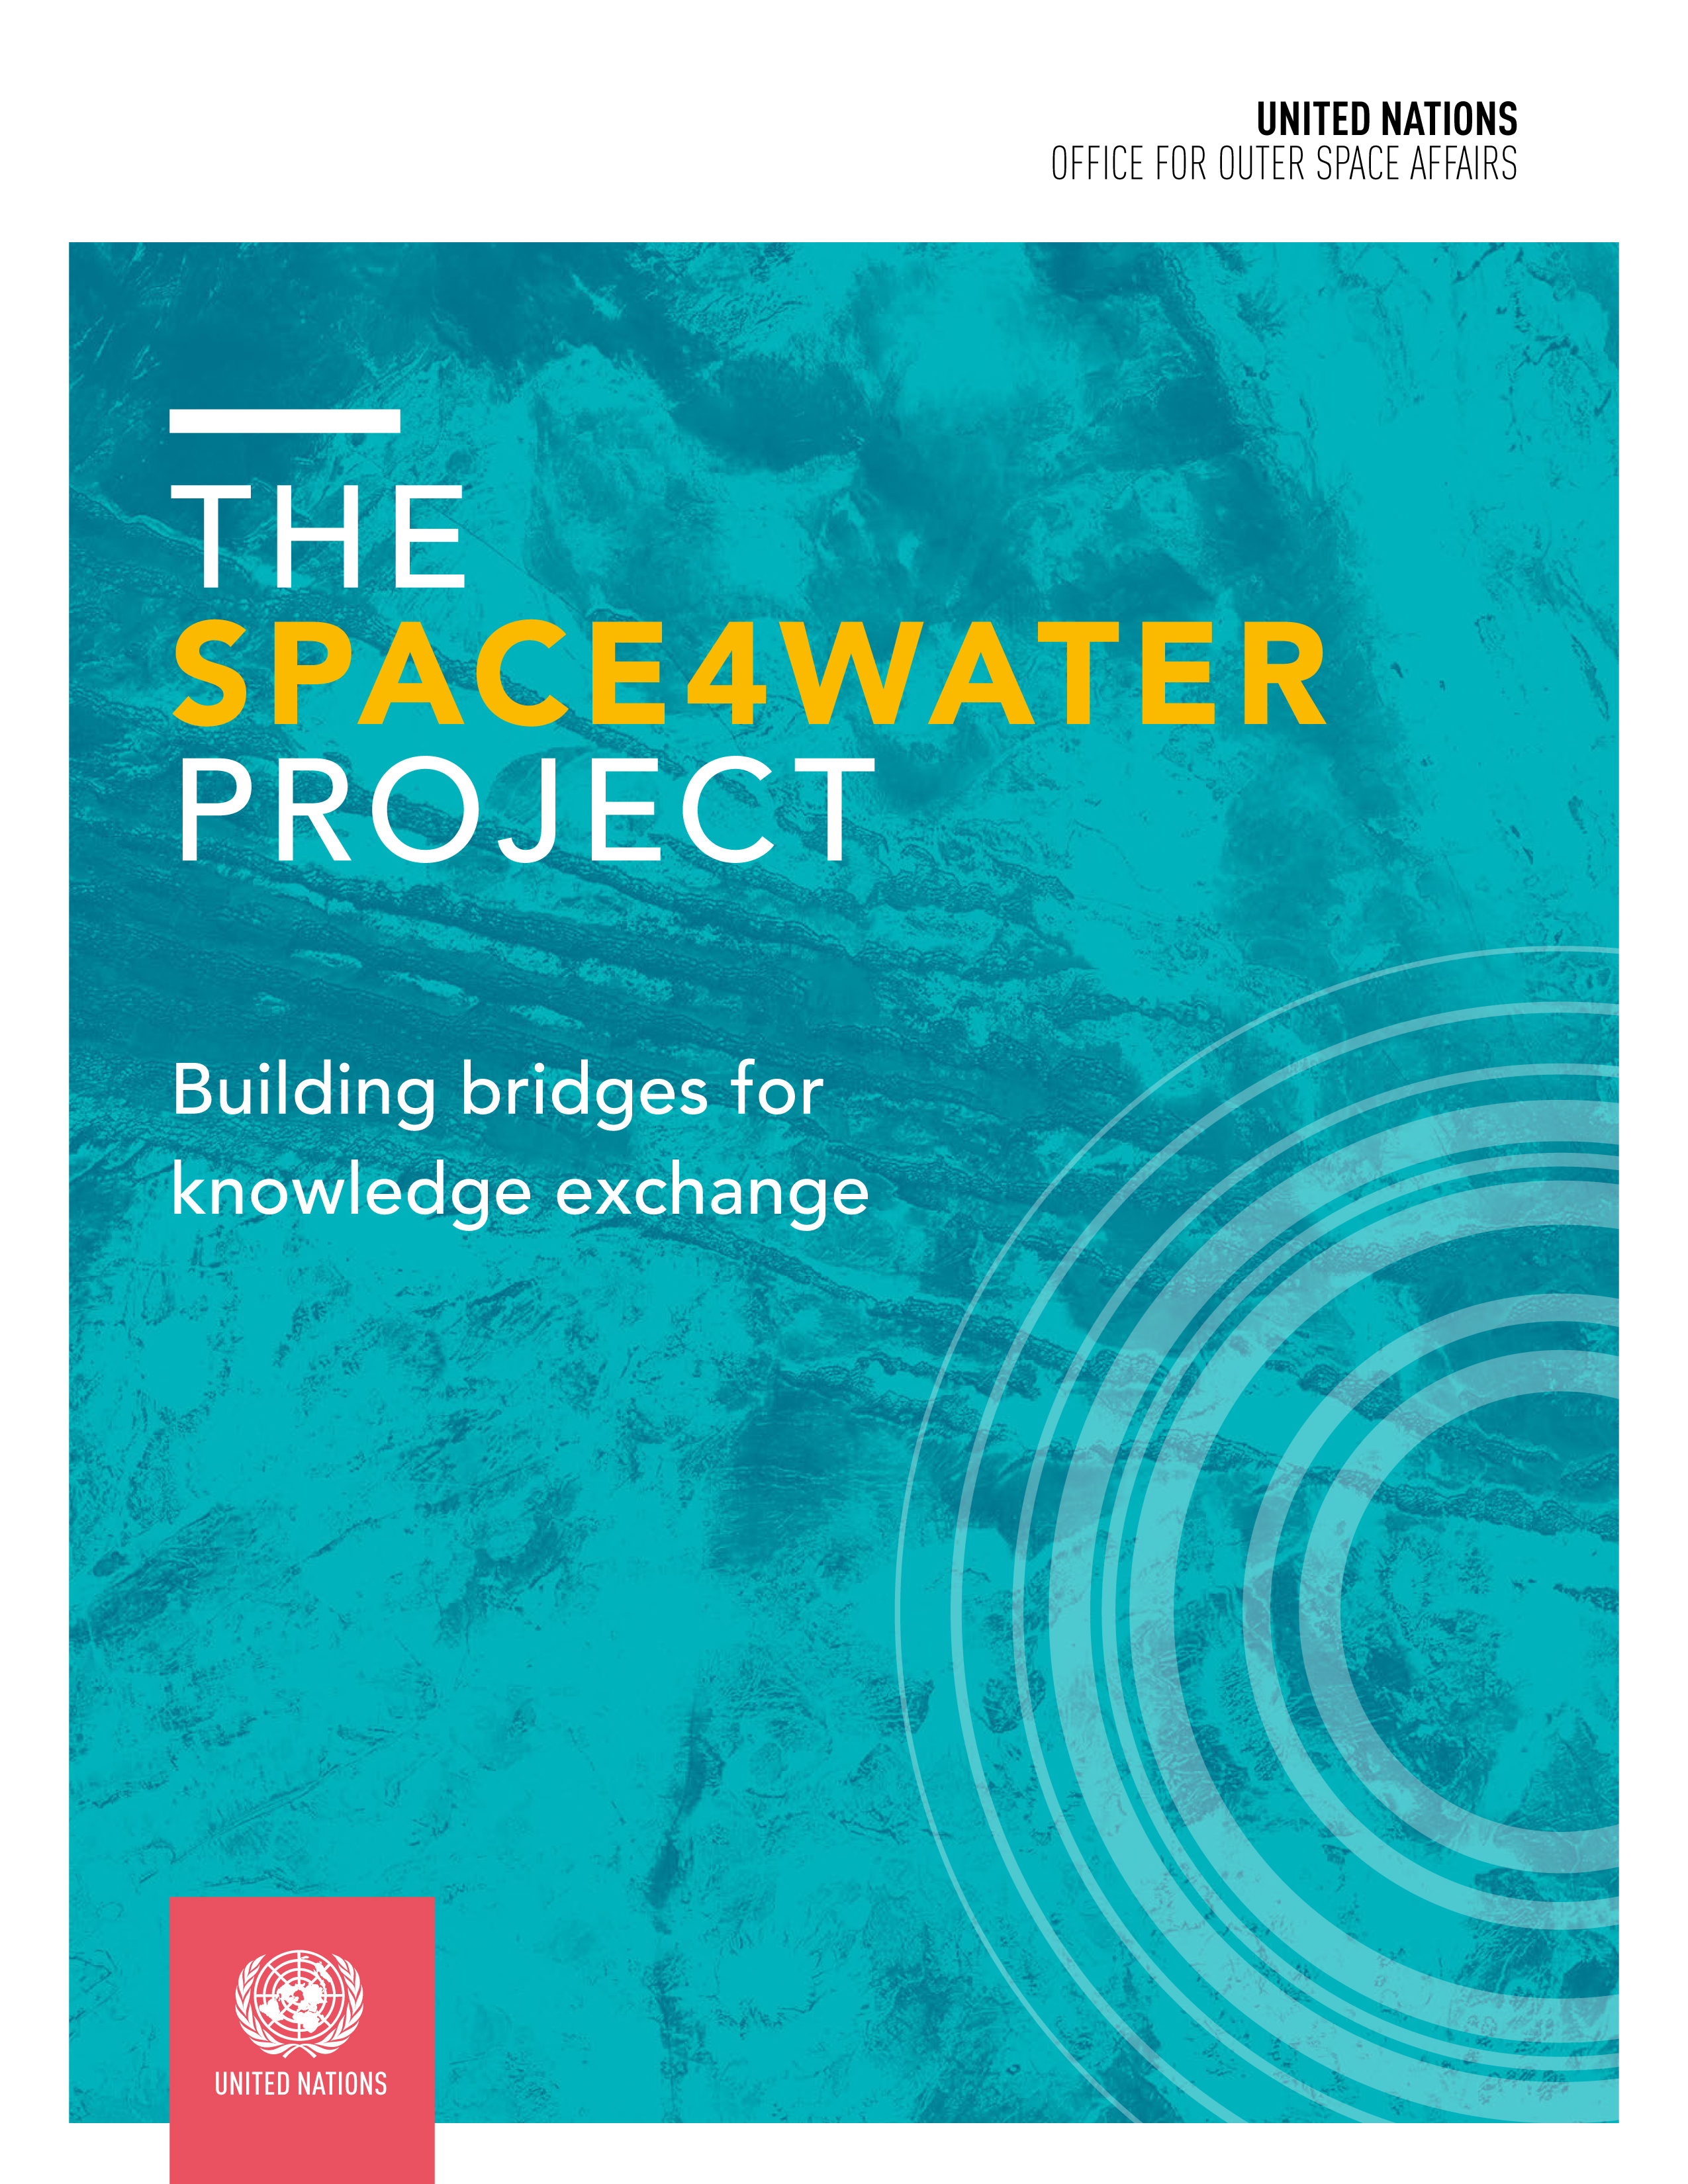 image of The Space4Water project